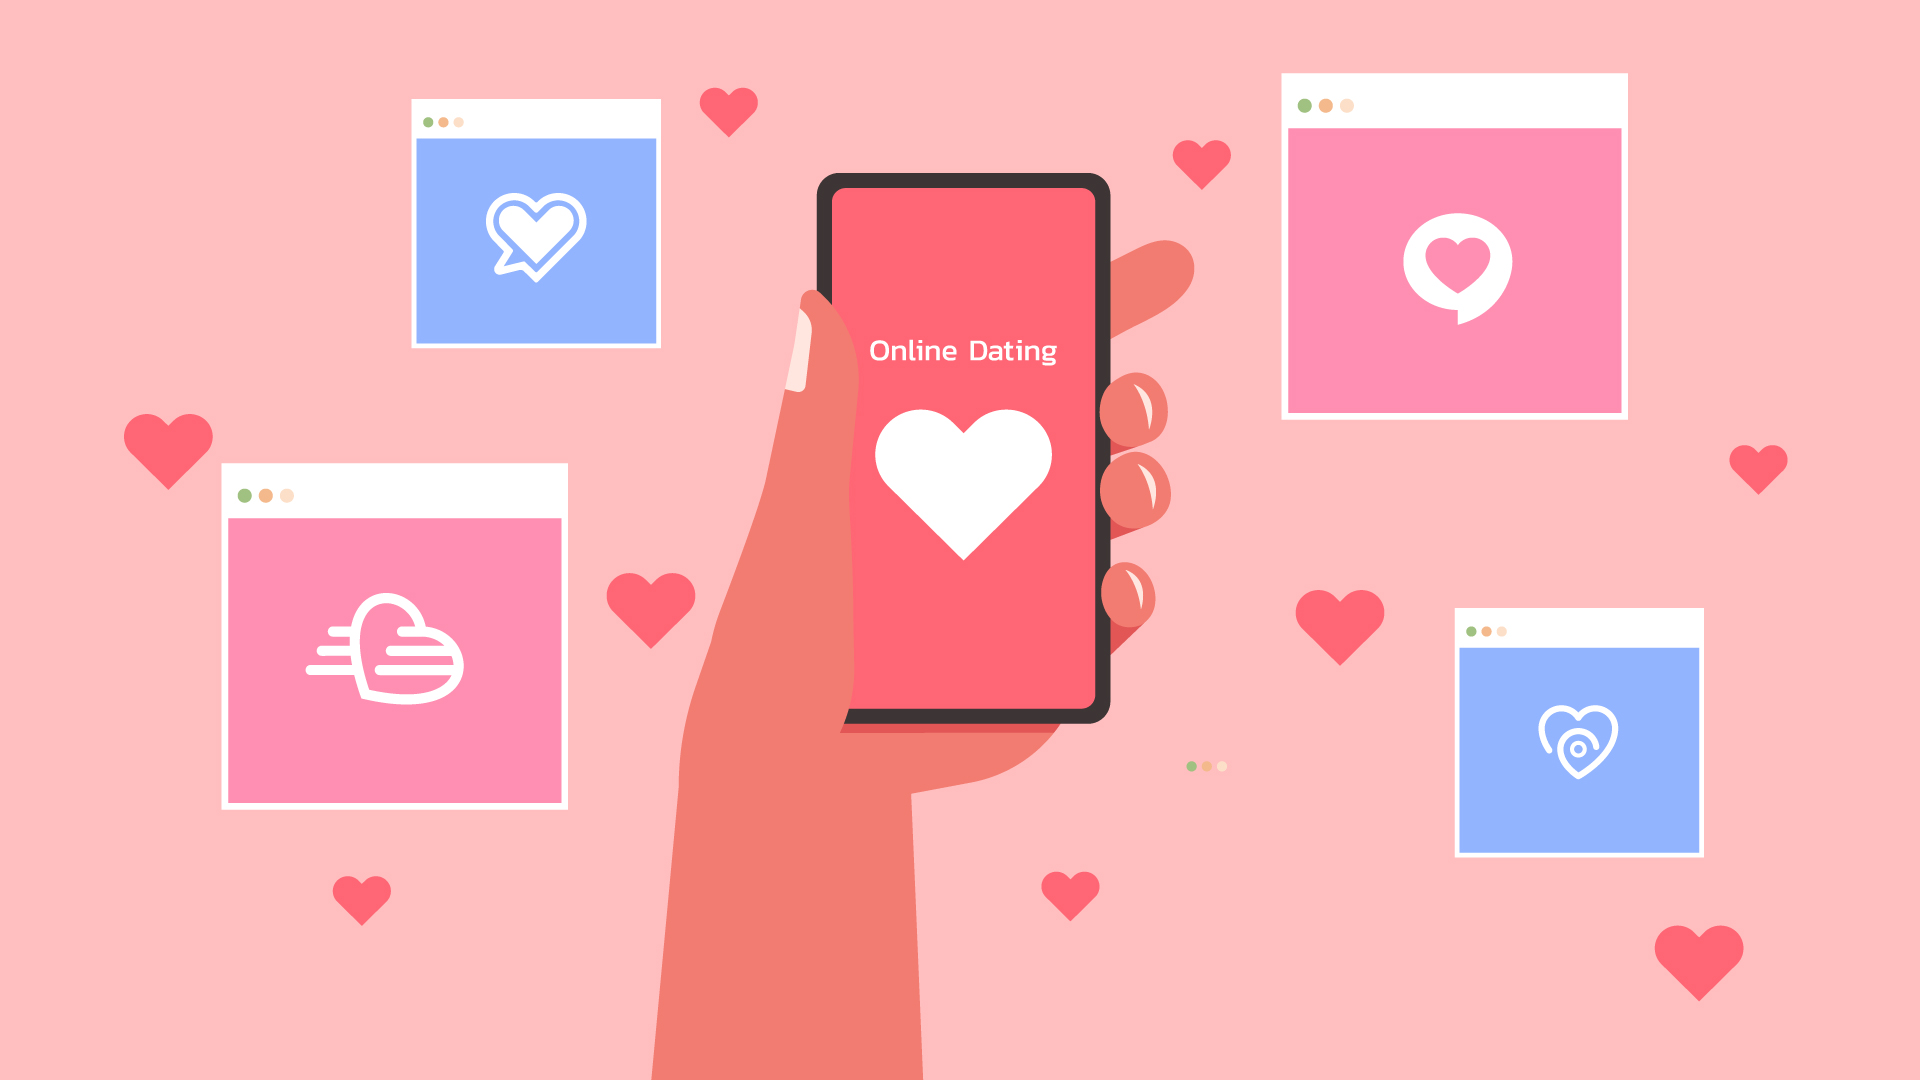 Hand holding a phone surrounded by multiple windows each on different dating sites and love hearts. Light pink background.